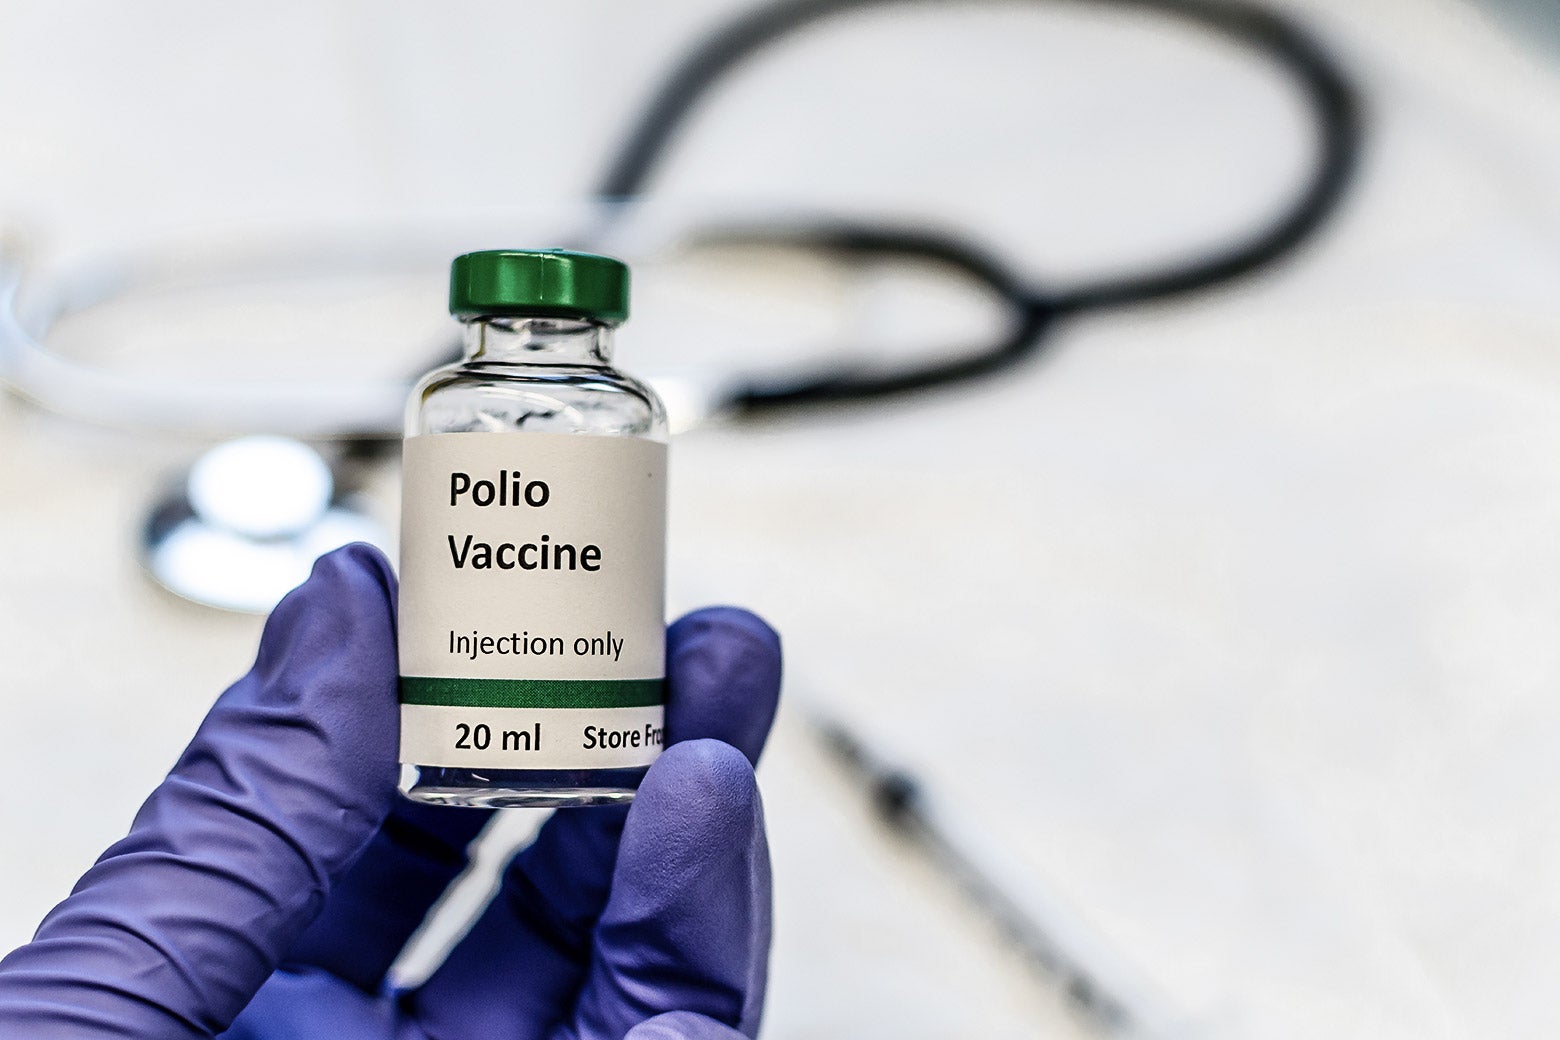 A vial of the polio vaccine